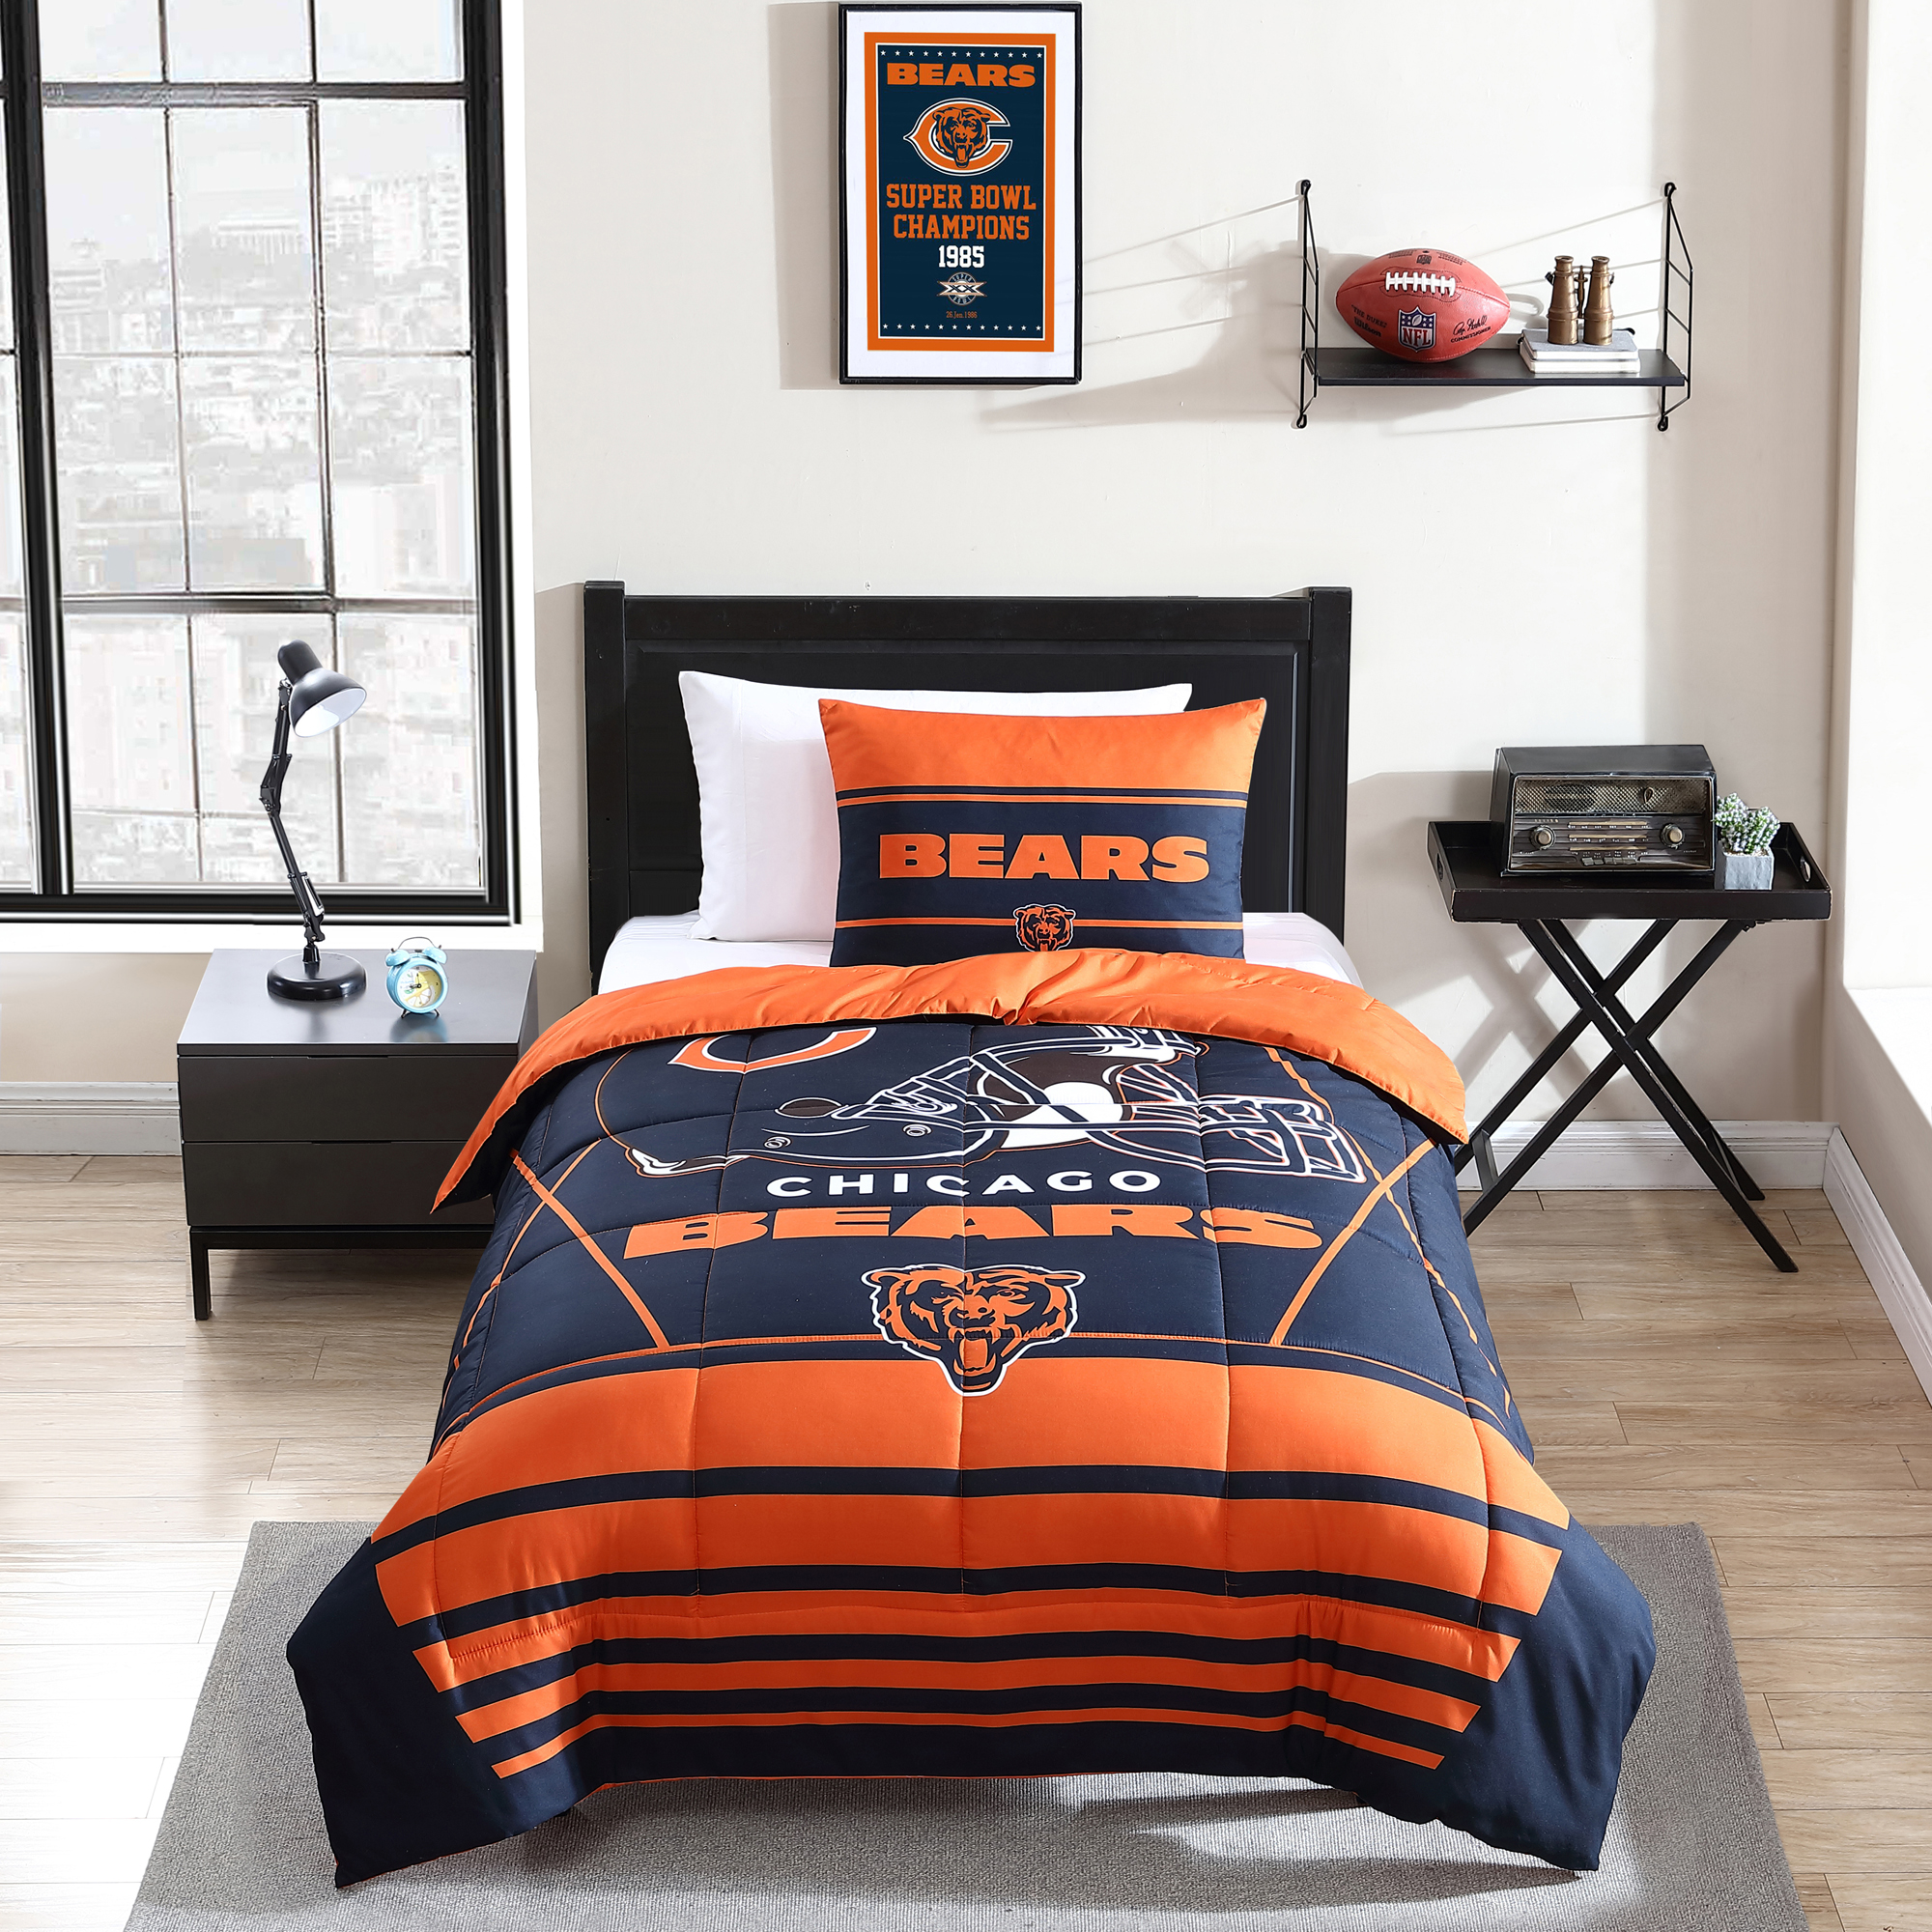 Chicago Bears Twin Comforter Set with Sham